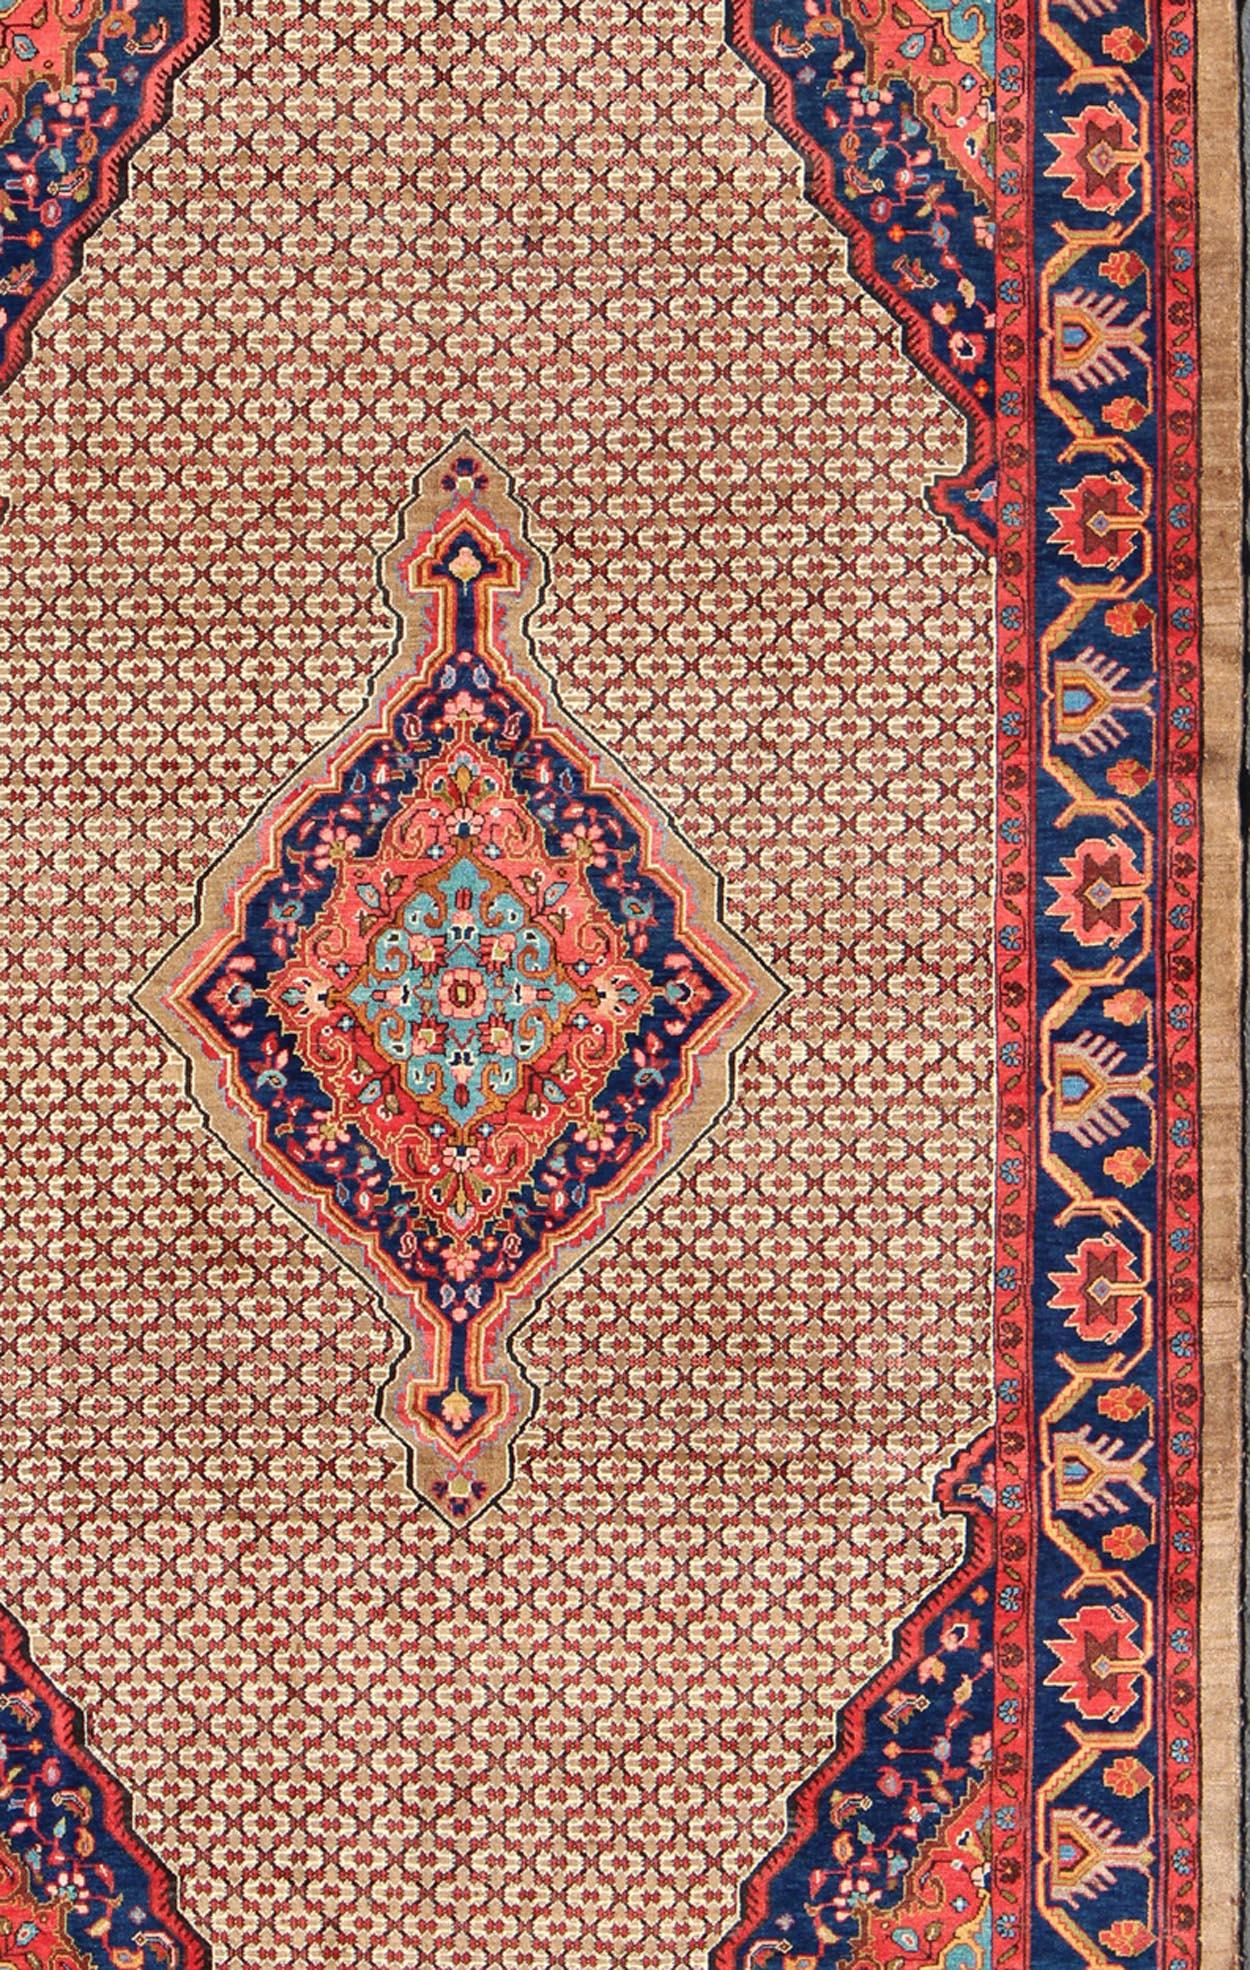 Hand-Knotted Vintage Persian Hamedan Rug with Layered Floral Medallion in Red, Blue, Cream